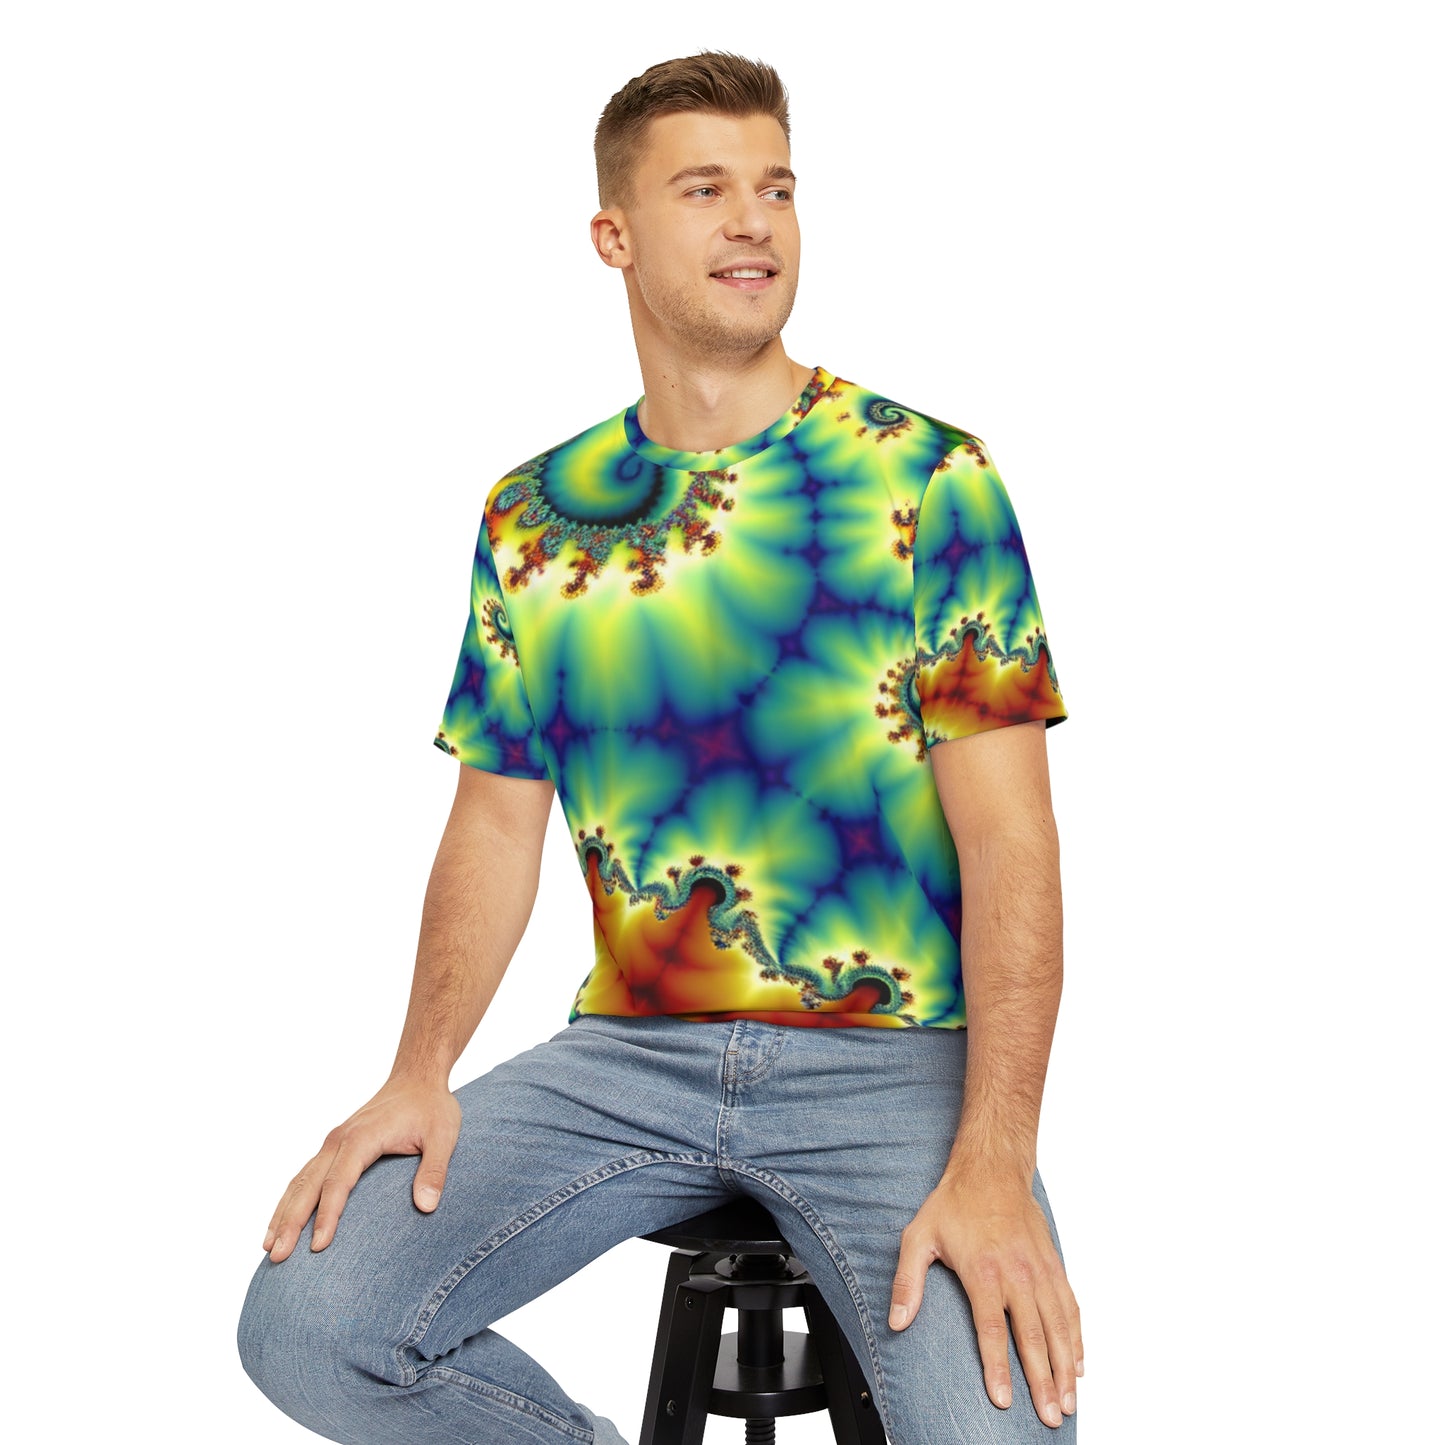 Front view of the Spectral Helix Dreamatorium Crewneck Pullover All-Over Print Short-Sleeved Shirt yellow oranger red blue green purple spectral pattern paired with casual denim pants worn  by a white man sitting on a stool chair